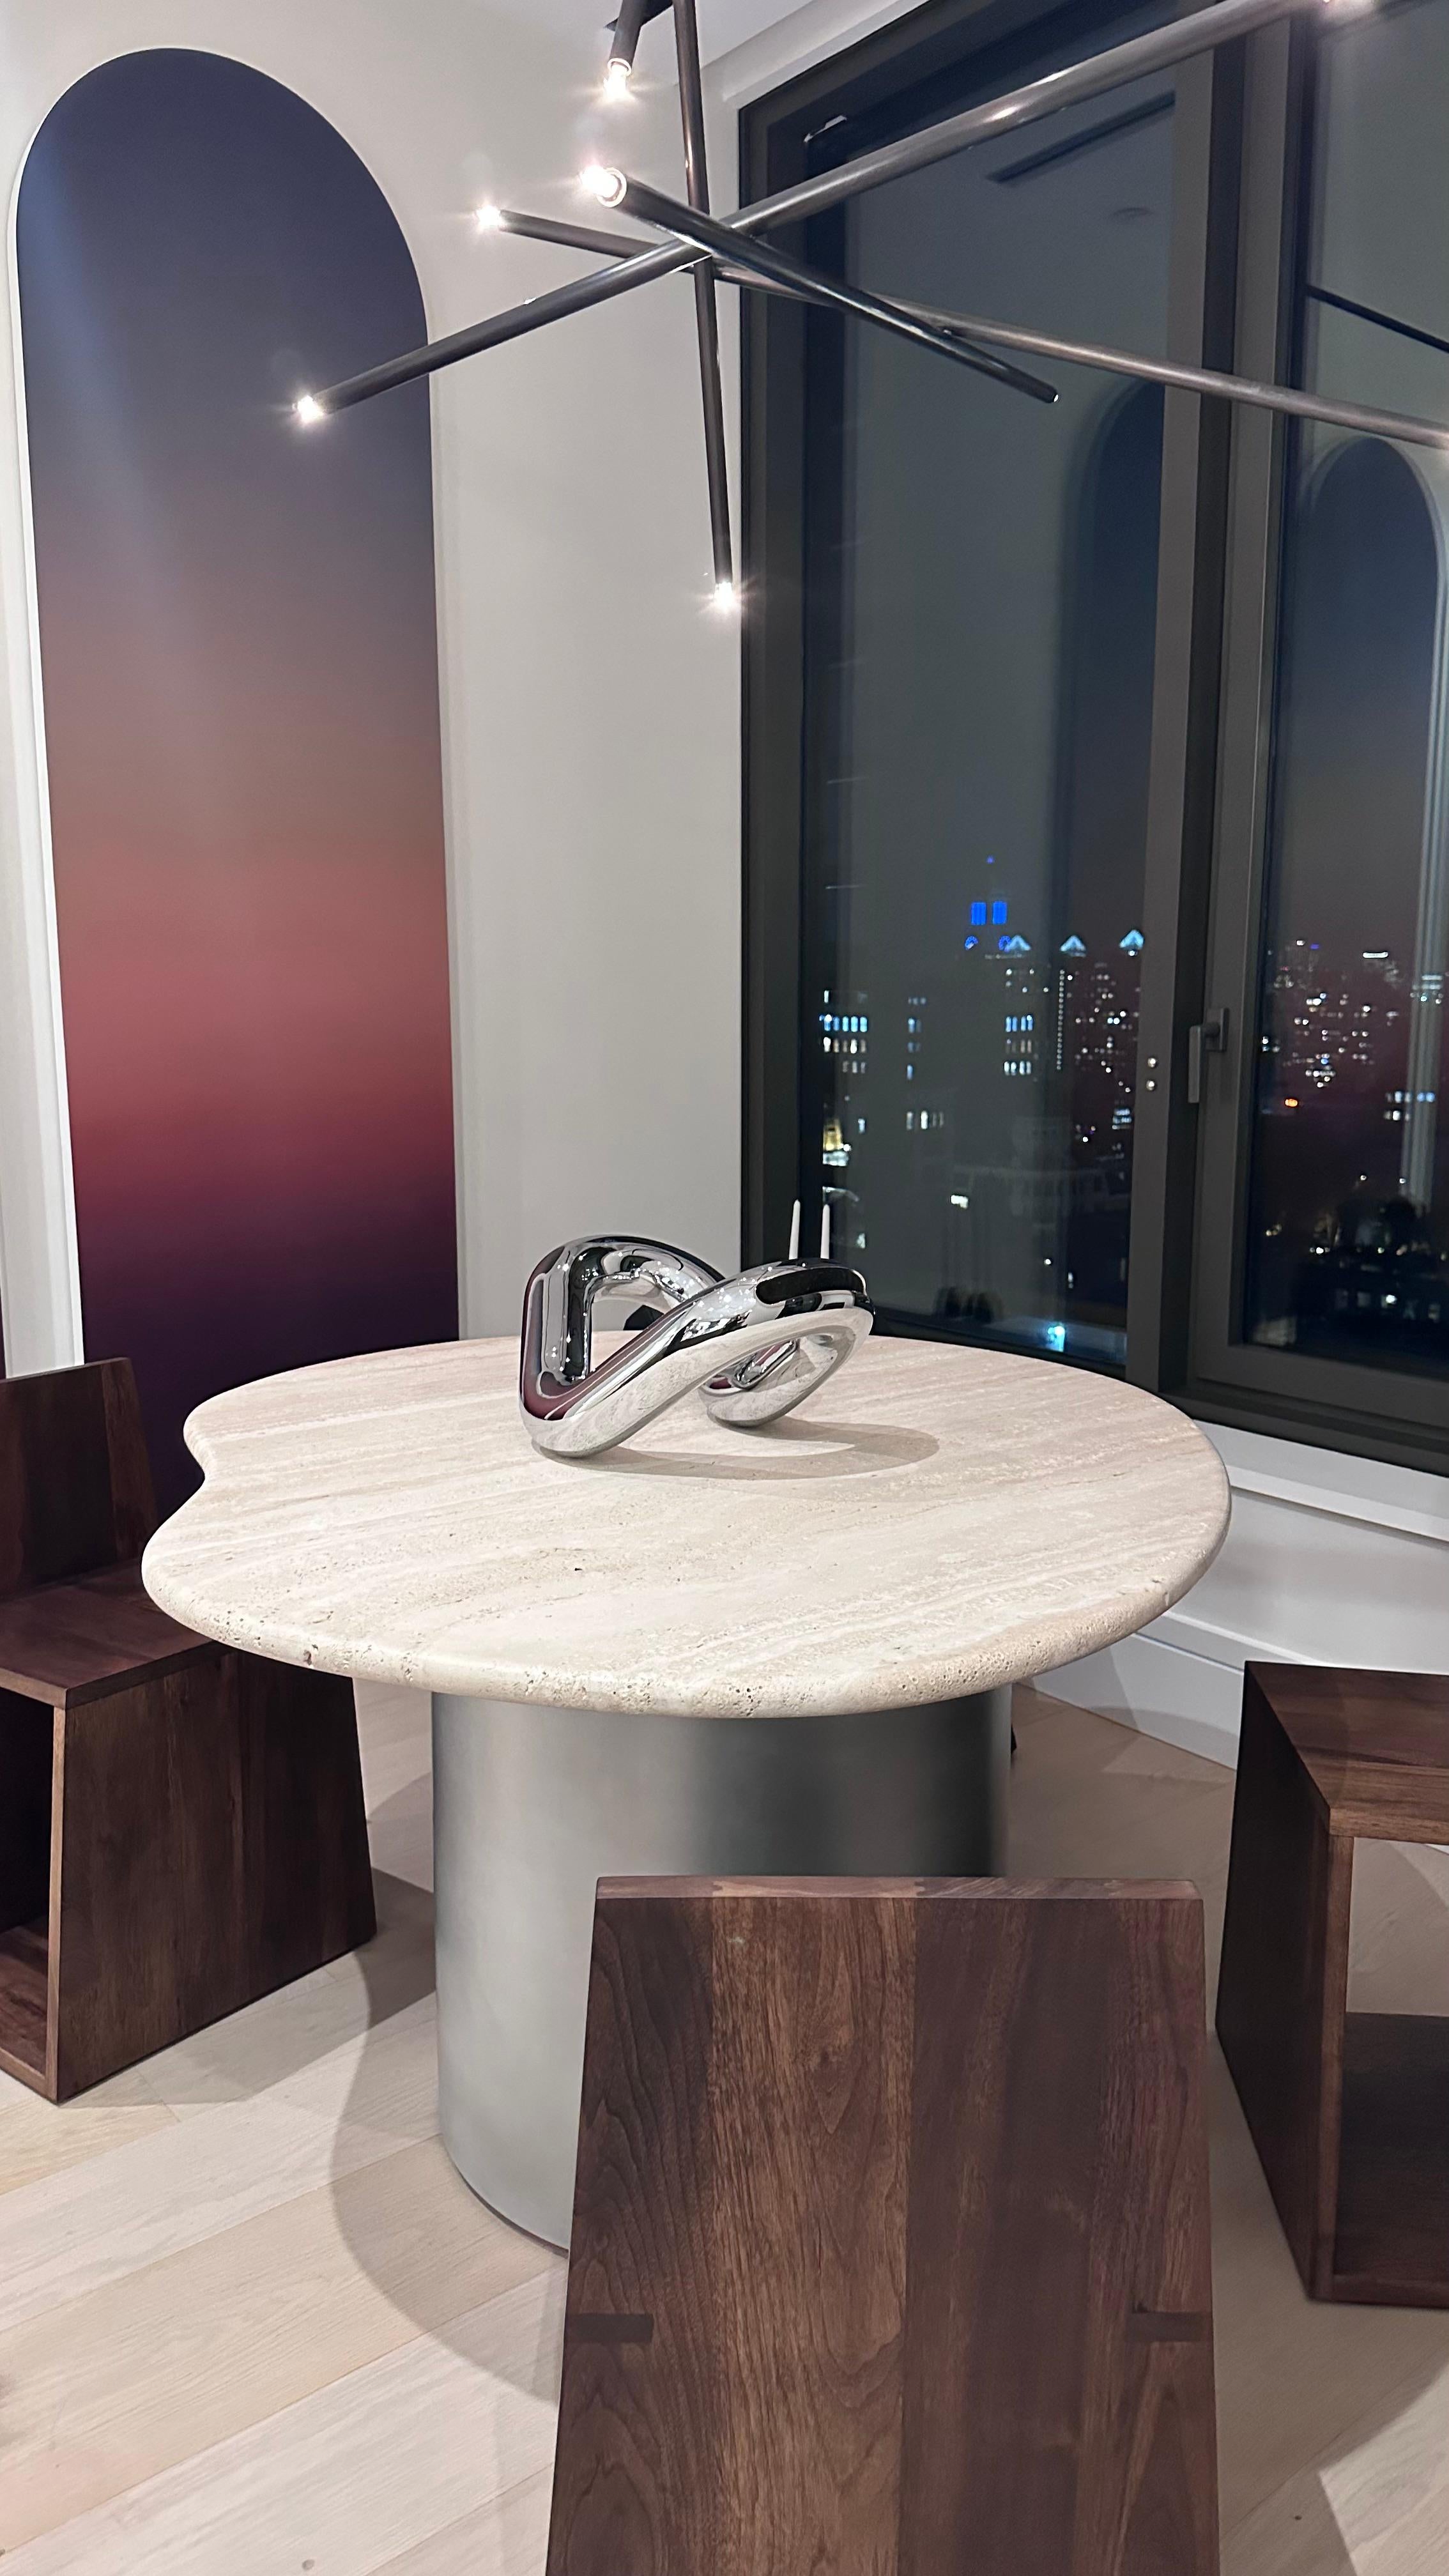 The Ena table highlights a stunning organic shaped top, carefully crafted from travertine stone. Artfully paired with a brush-finished and hand-waxed aluminum base, its design is a timeless blend of nature and craftsmanship. Option to add hidden